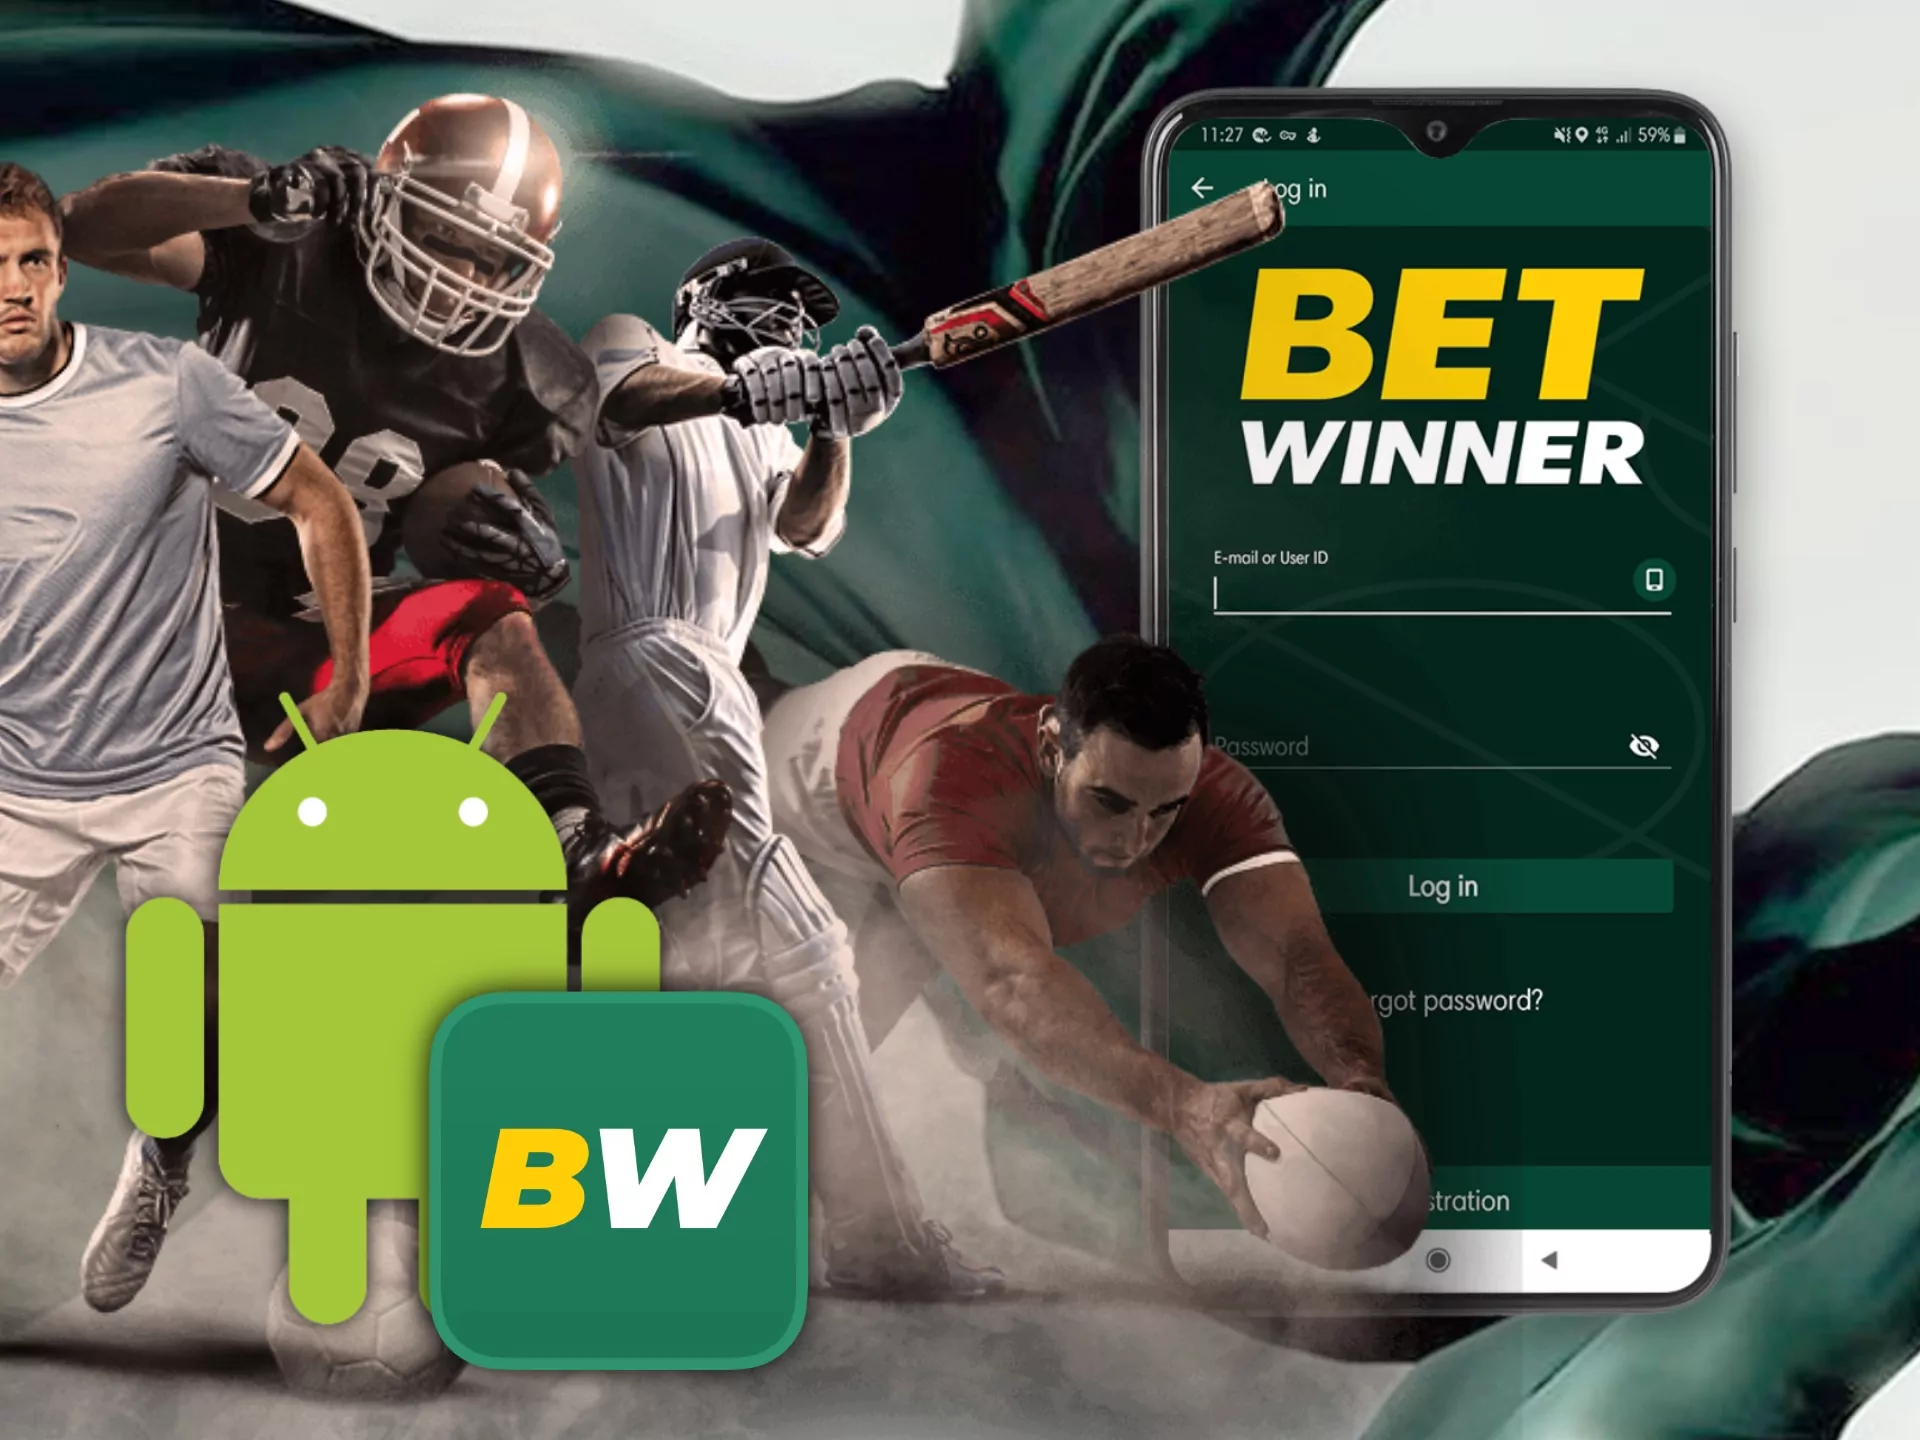 Are You Betwinner Download The Right Way? These 5 Tips Will Help You Answer